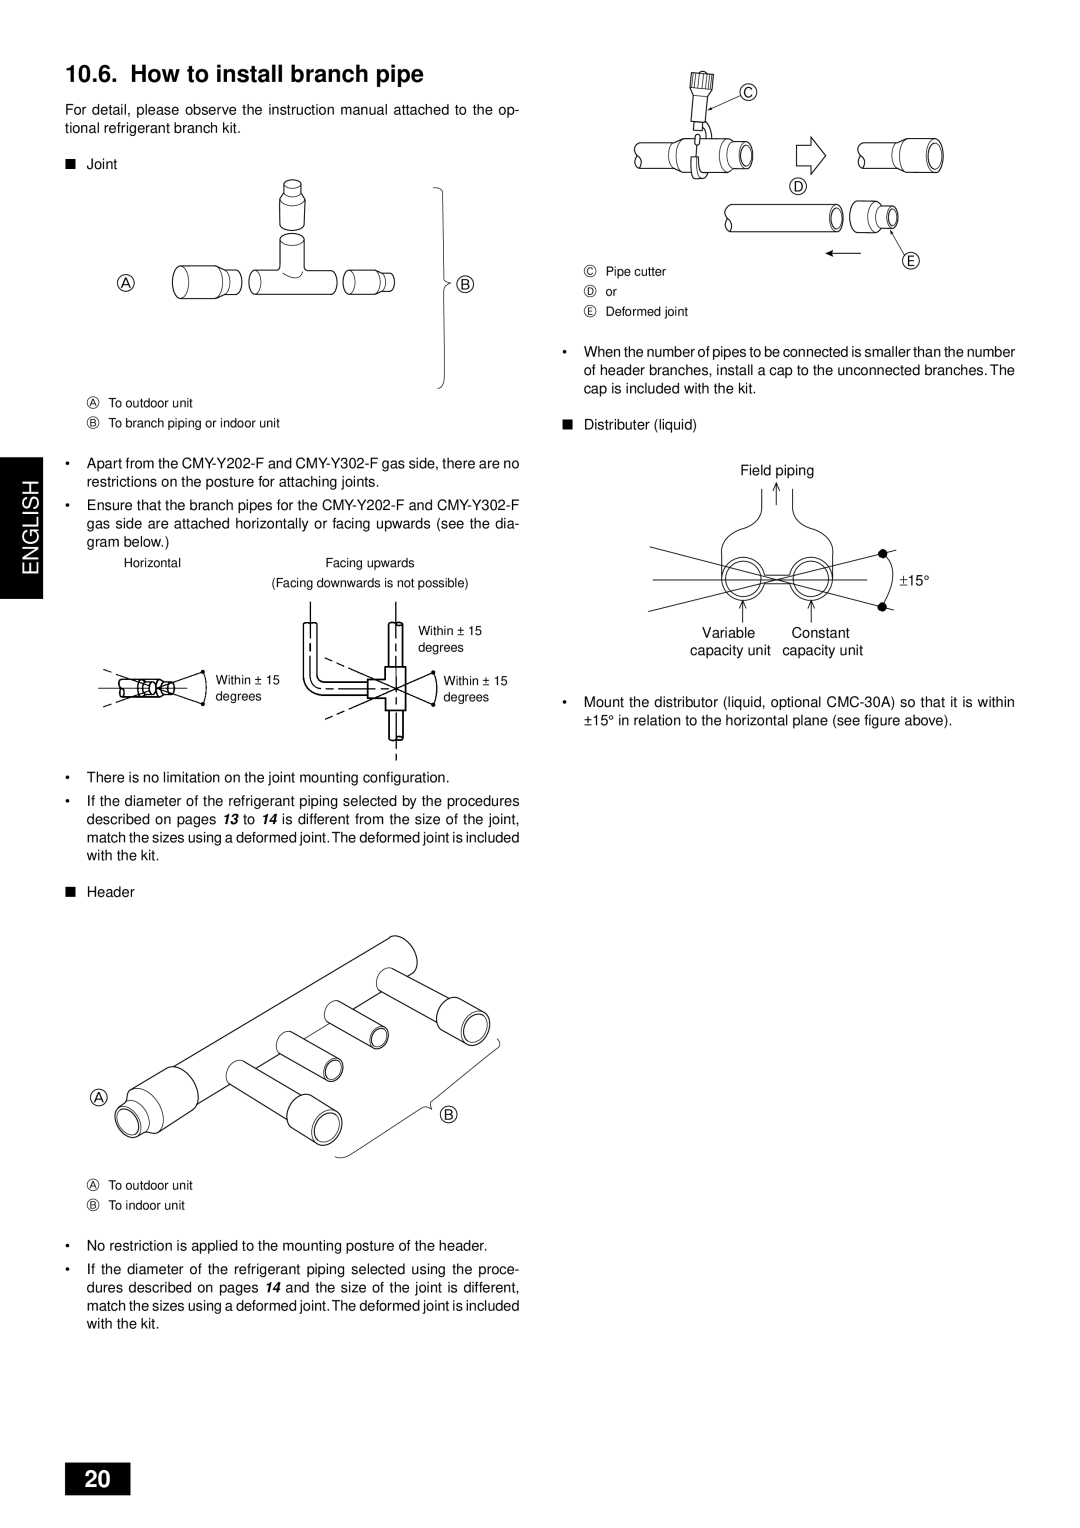 Mitsubishi Electronics PUHY-YMC installation manual How to install branch pipe 